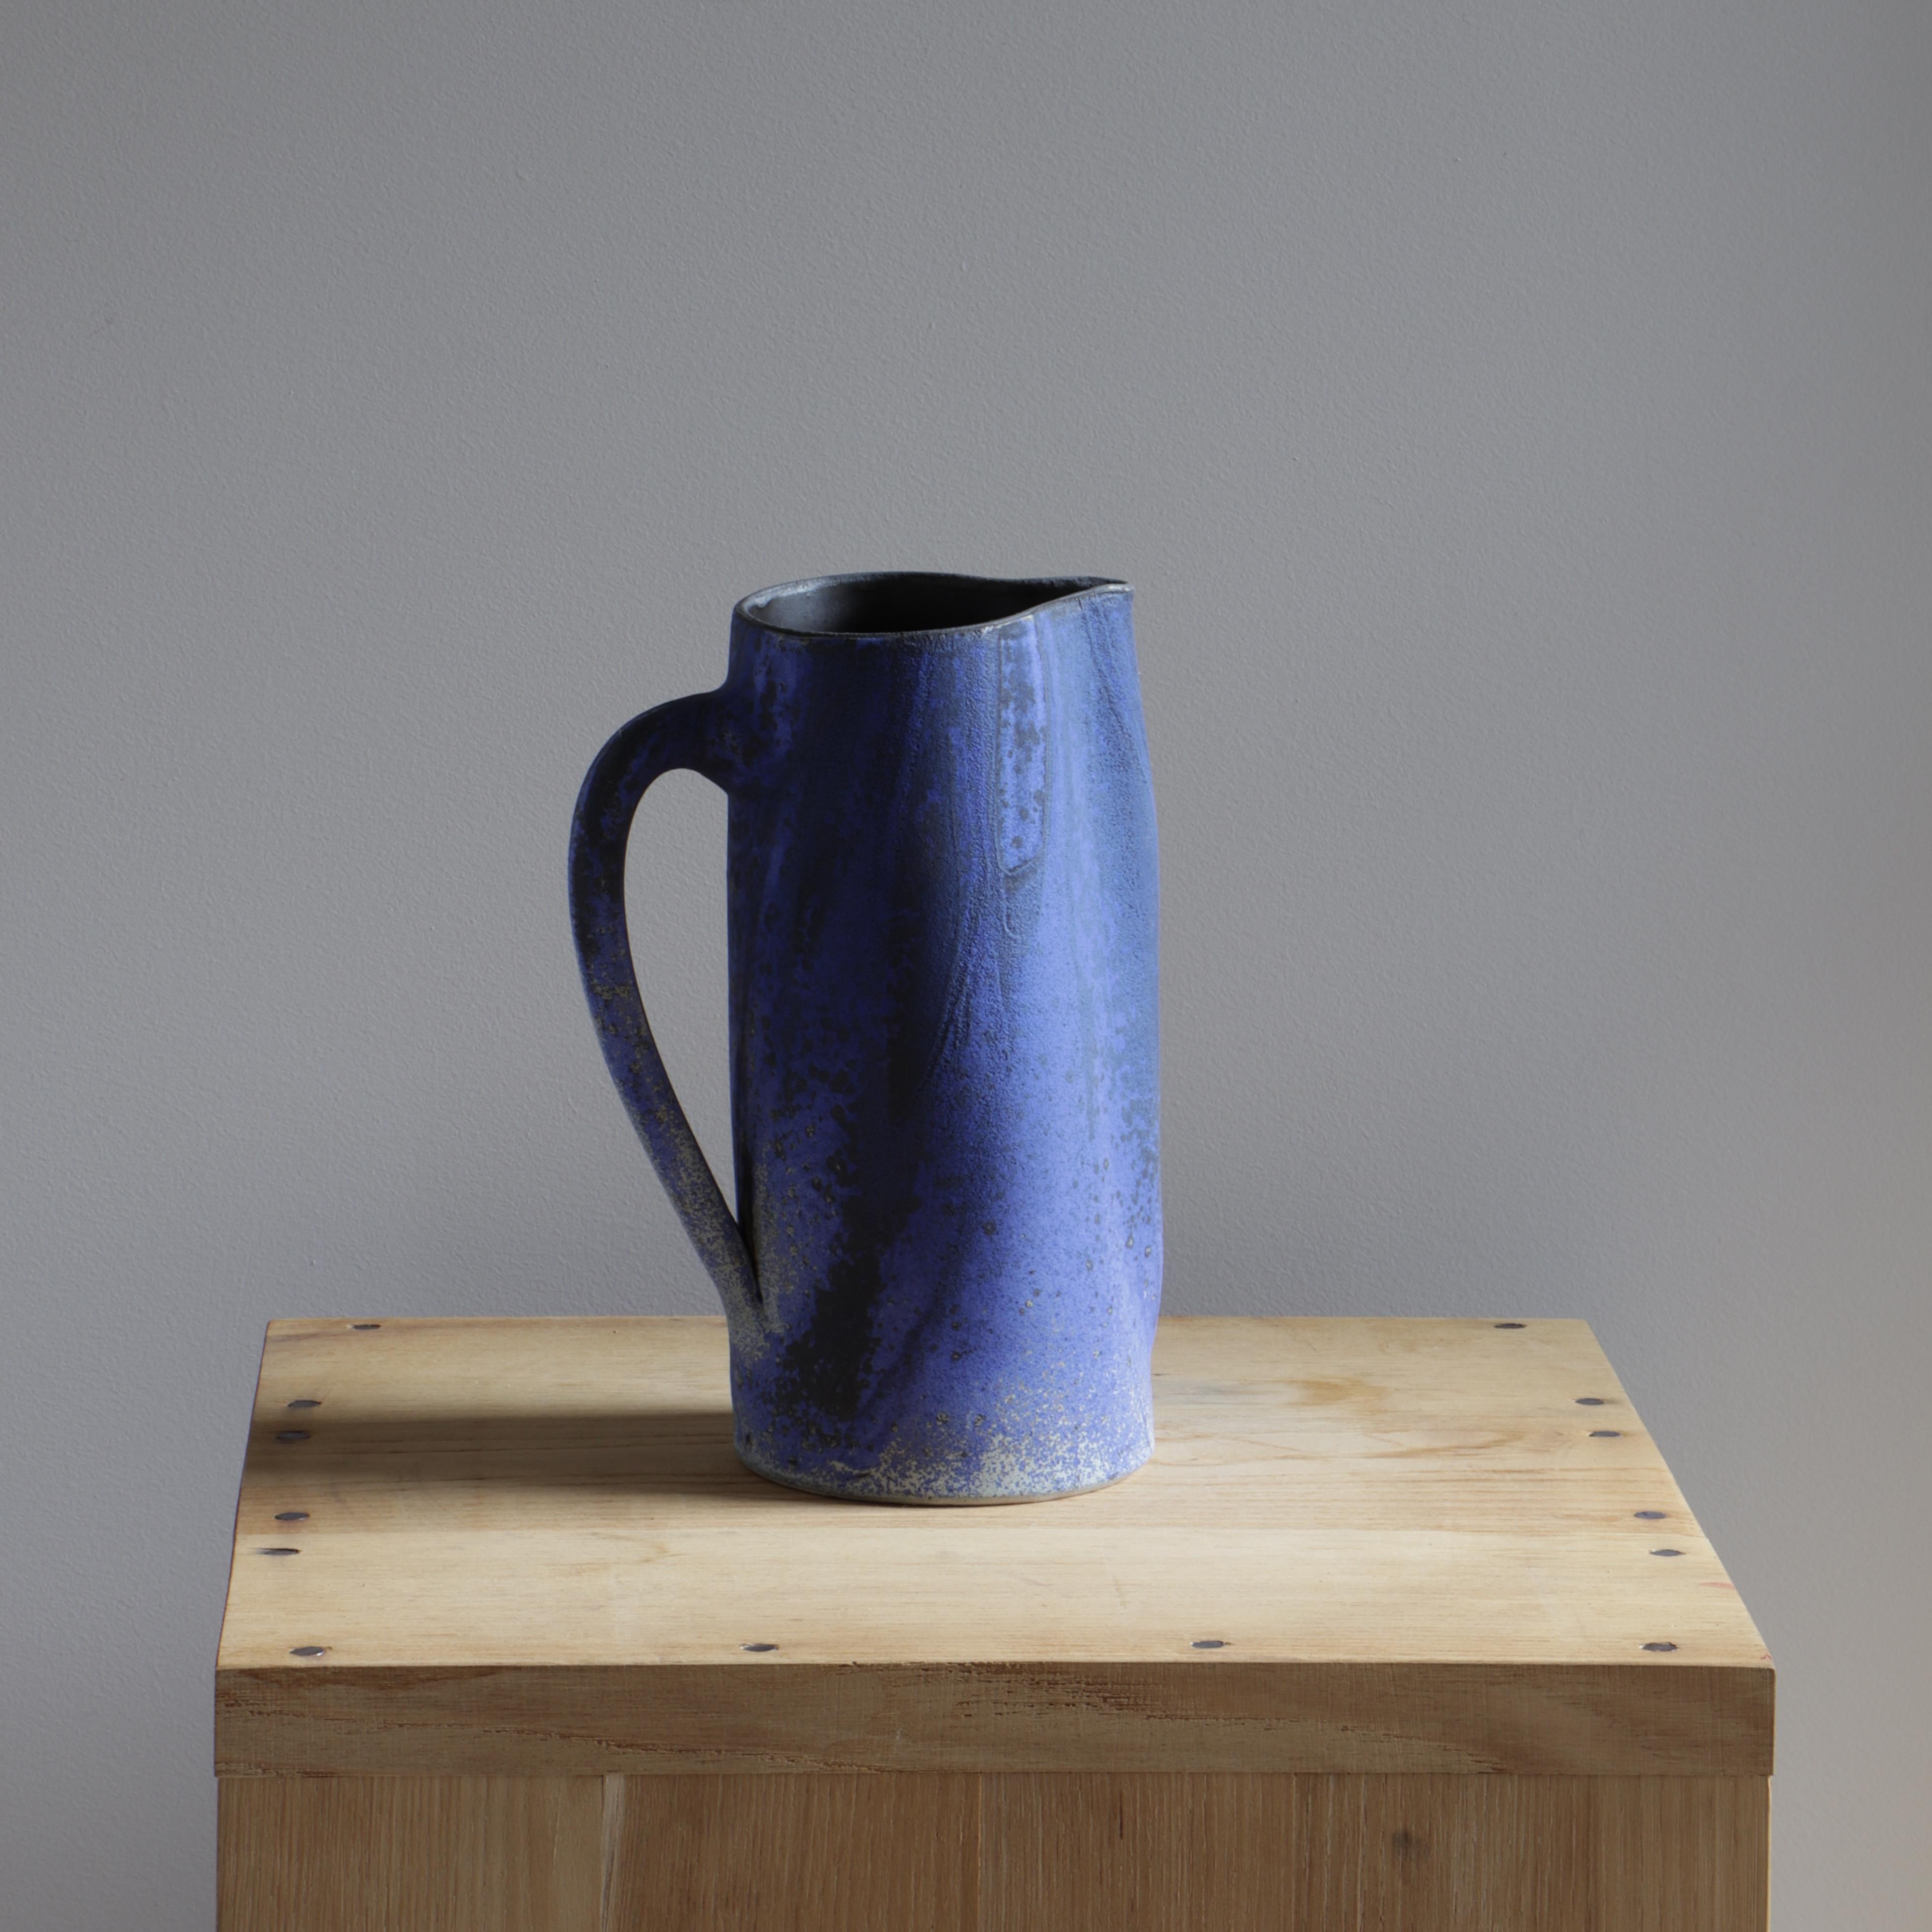 This ceramic jug was created by Ingrid Van Munster. Her works are made of porcelain sandstone. The colourisation phase consists in covering her pieces with enamel, after a first firing at 1000°C. She manufactures her own matt and satin enamels in a